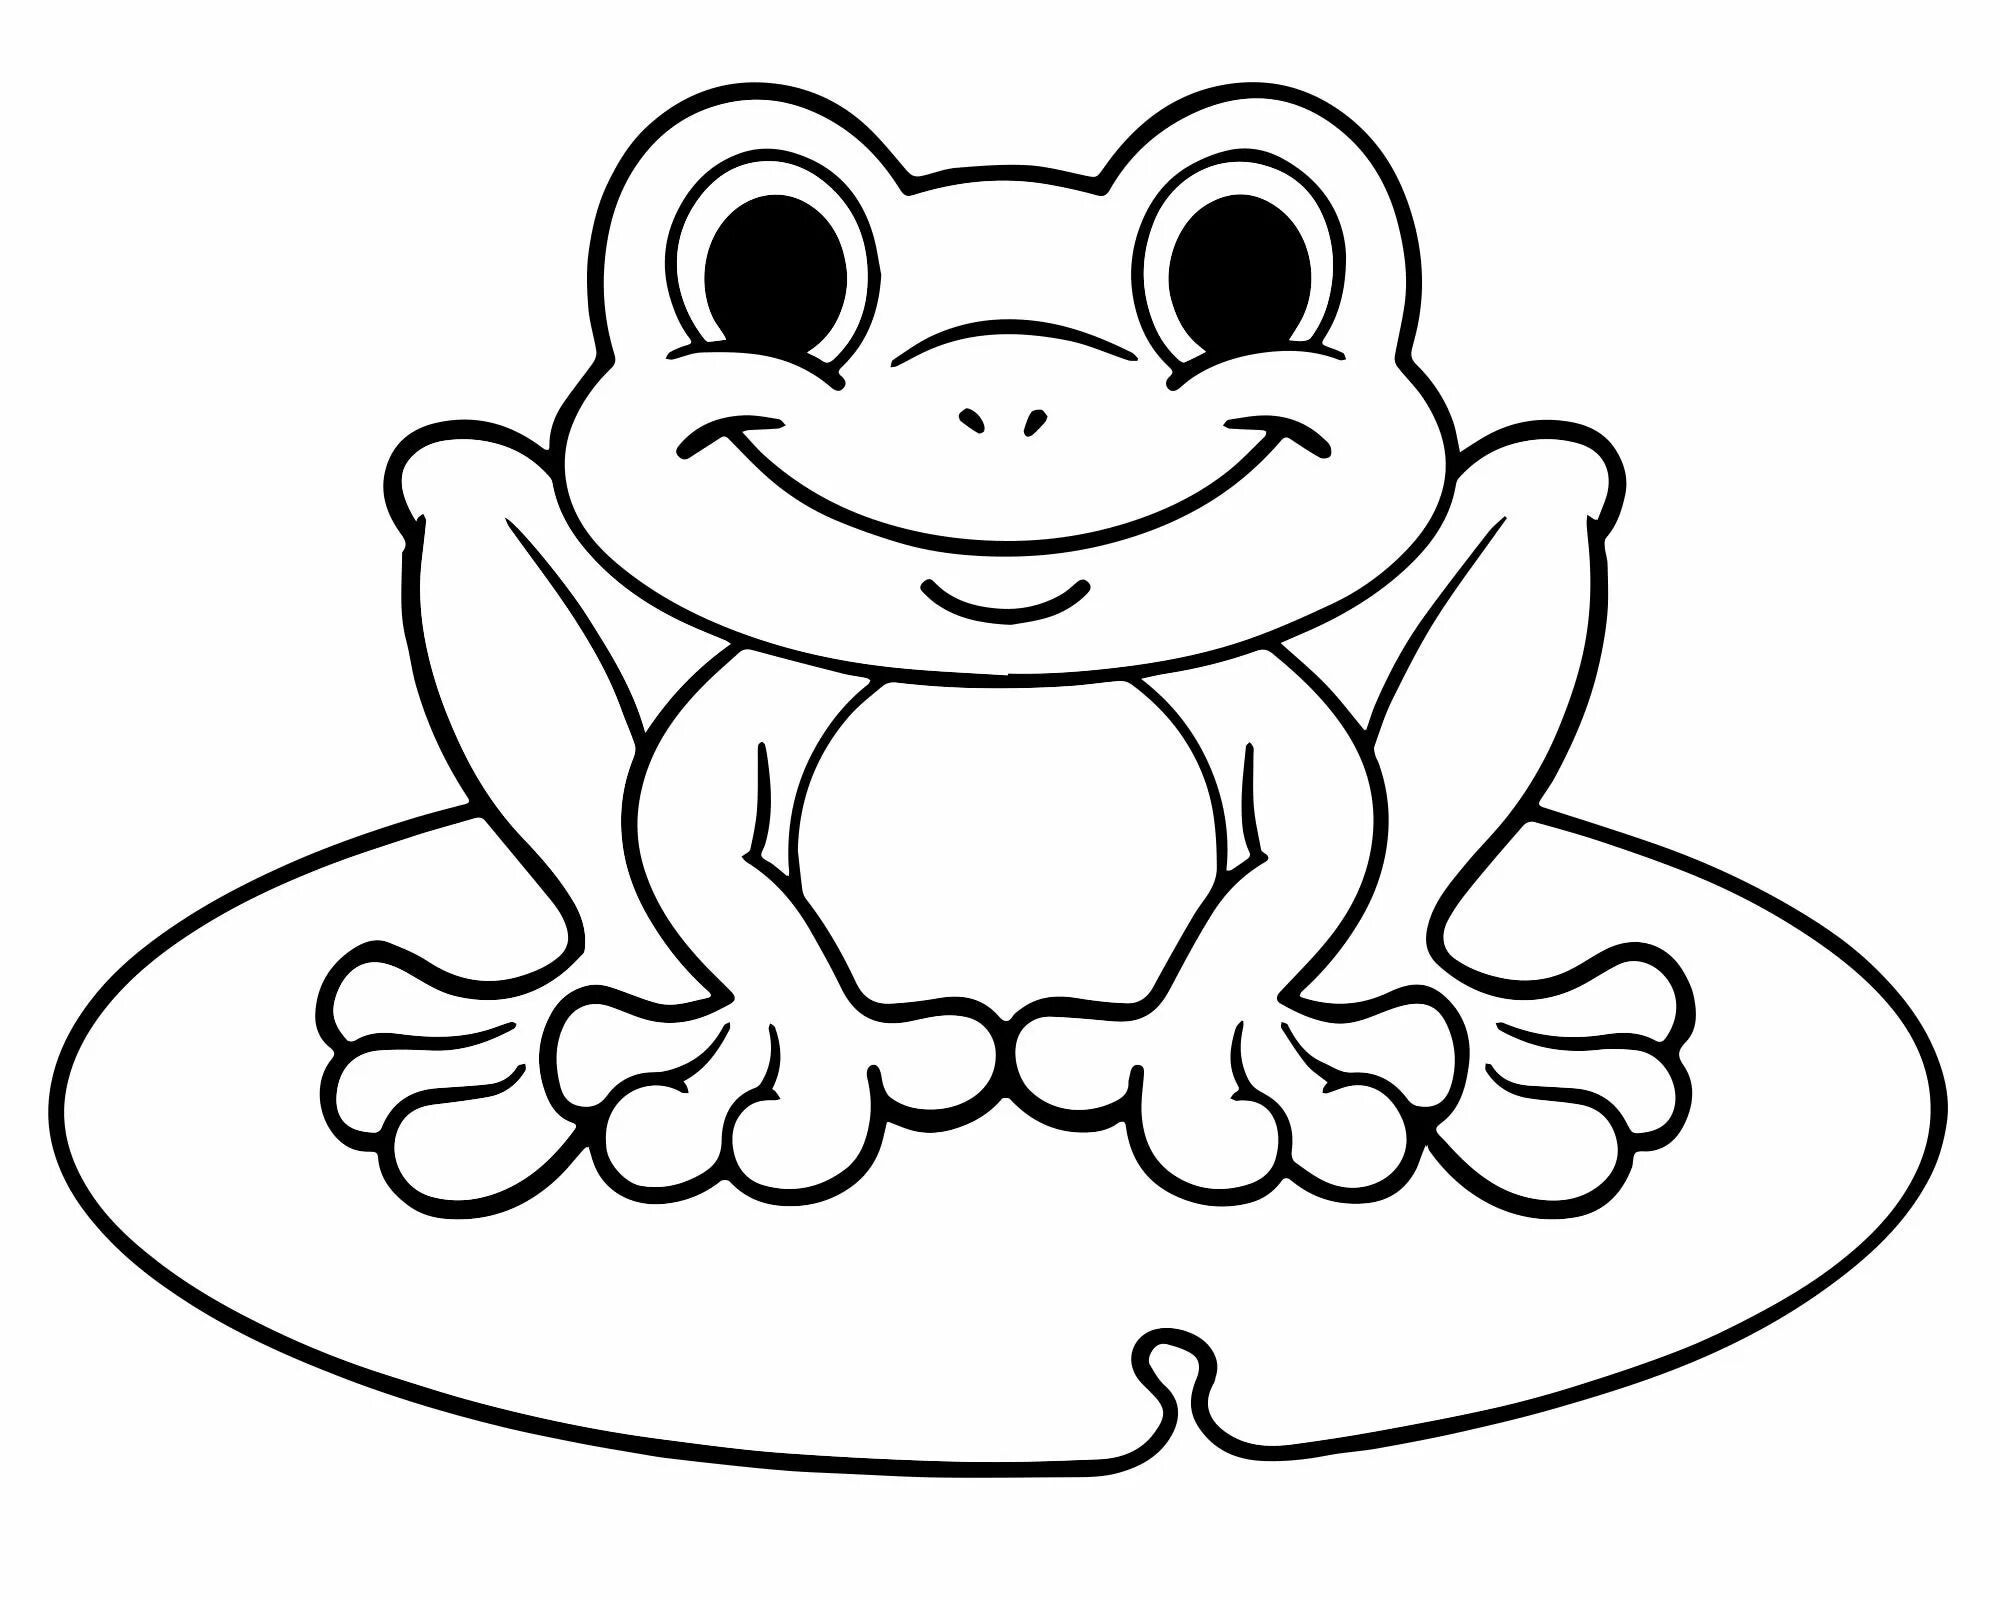 Inviting frog coloring book for kids